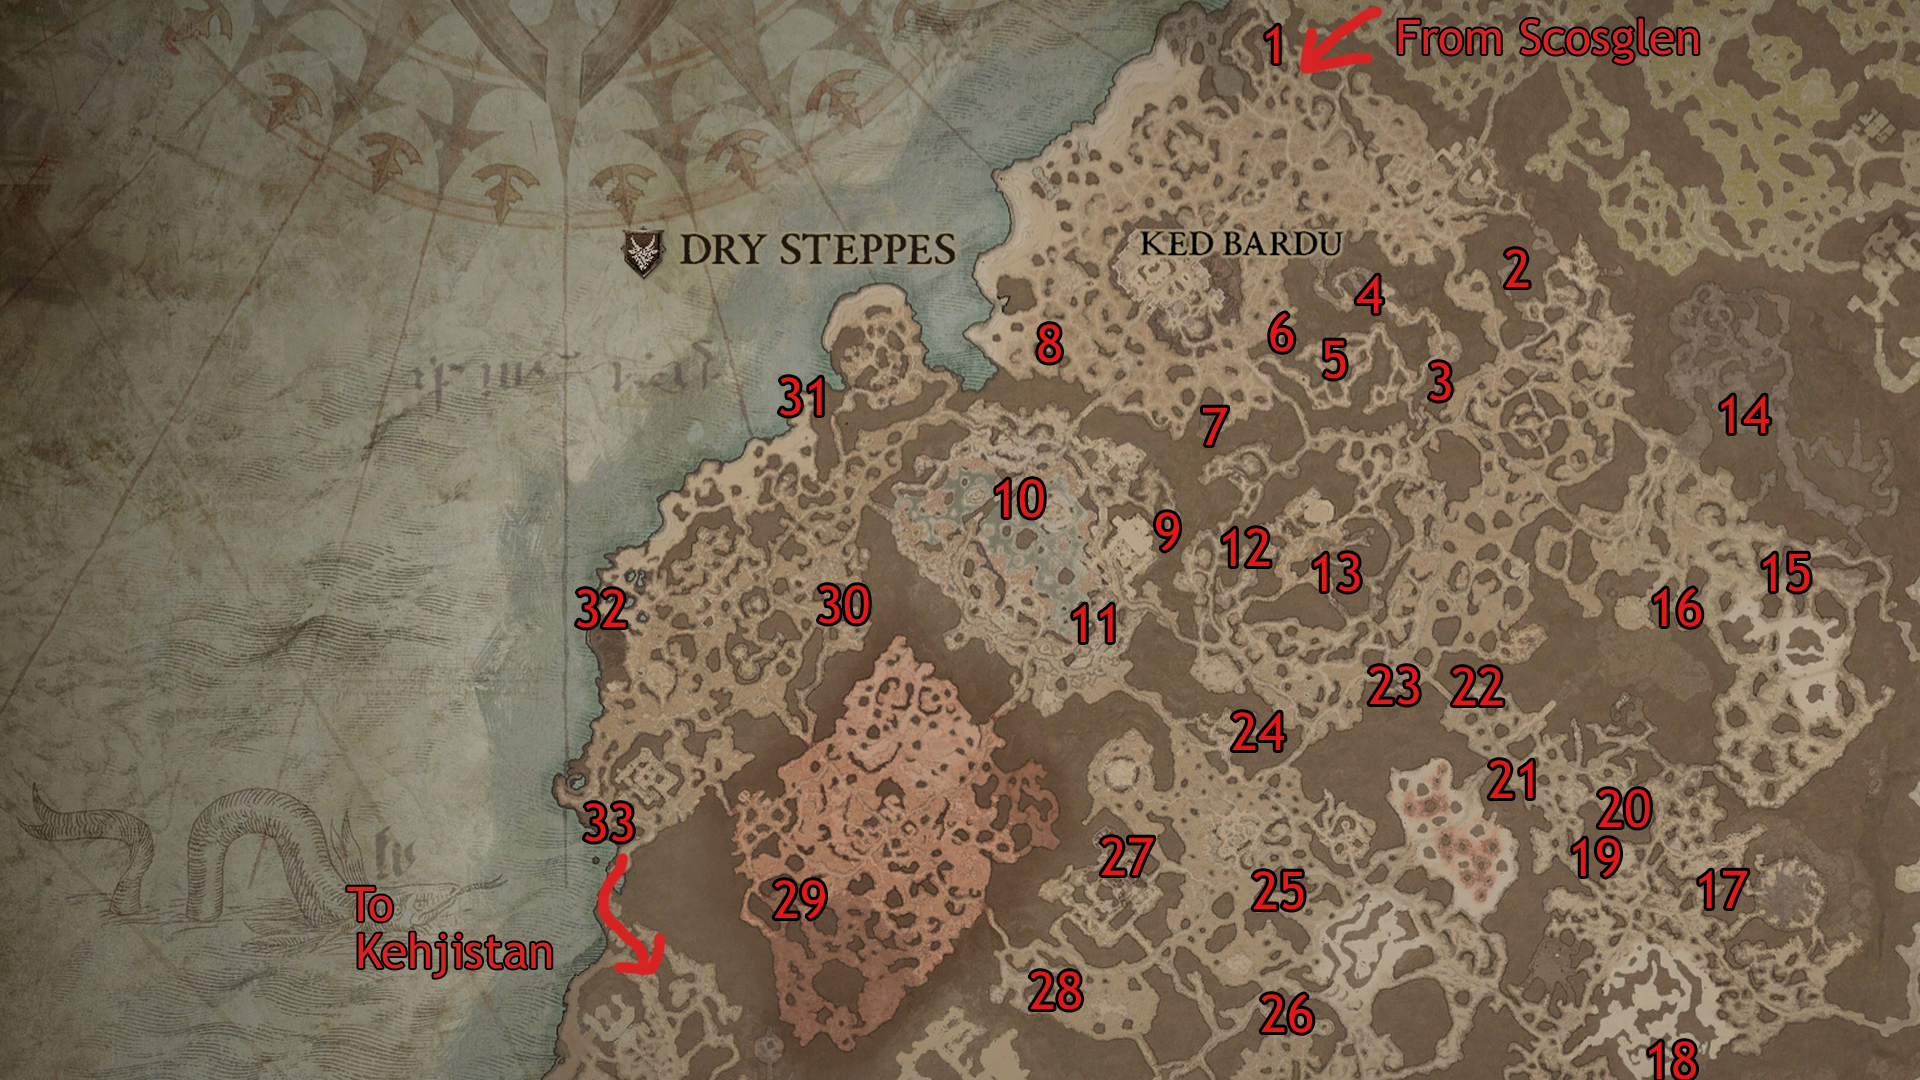 Diablo 4 Dry Steppes Altar of Lilith locations